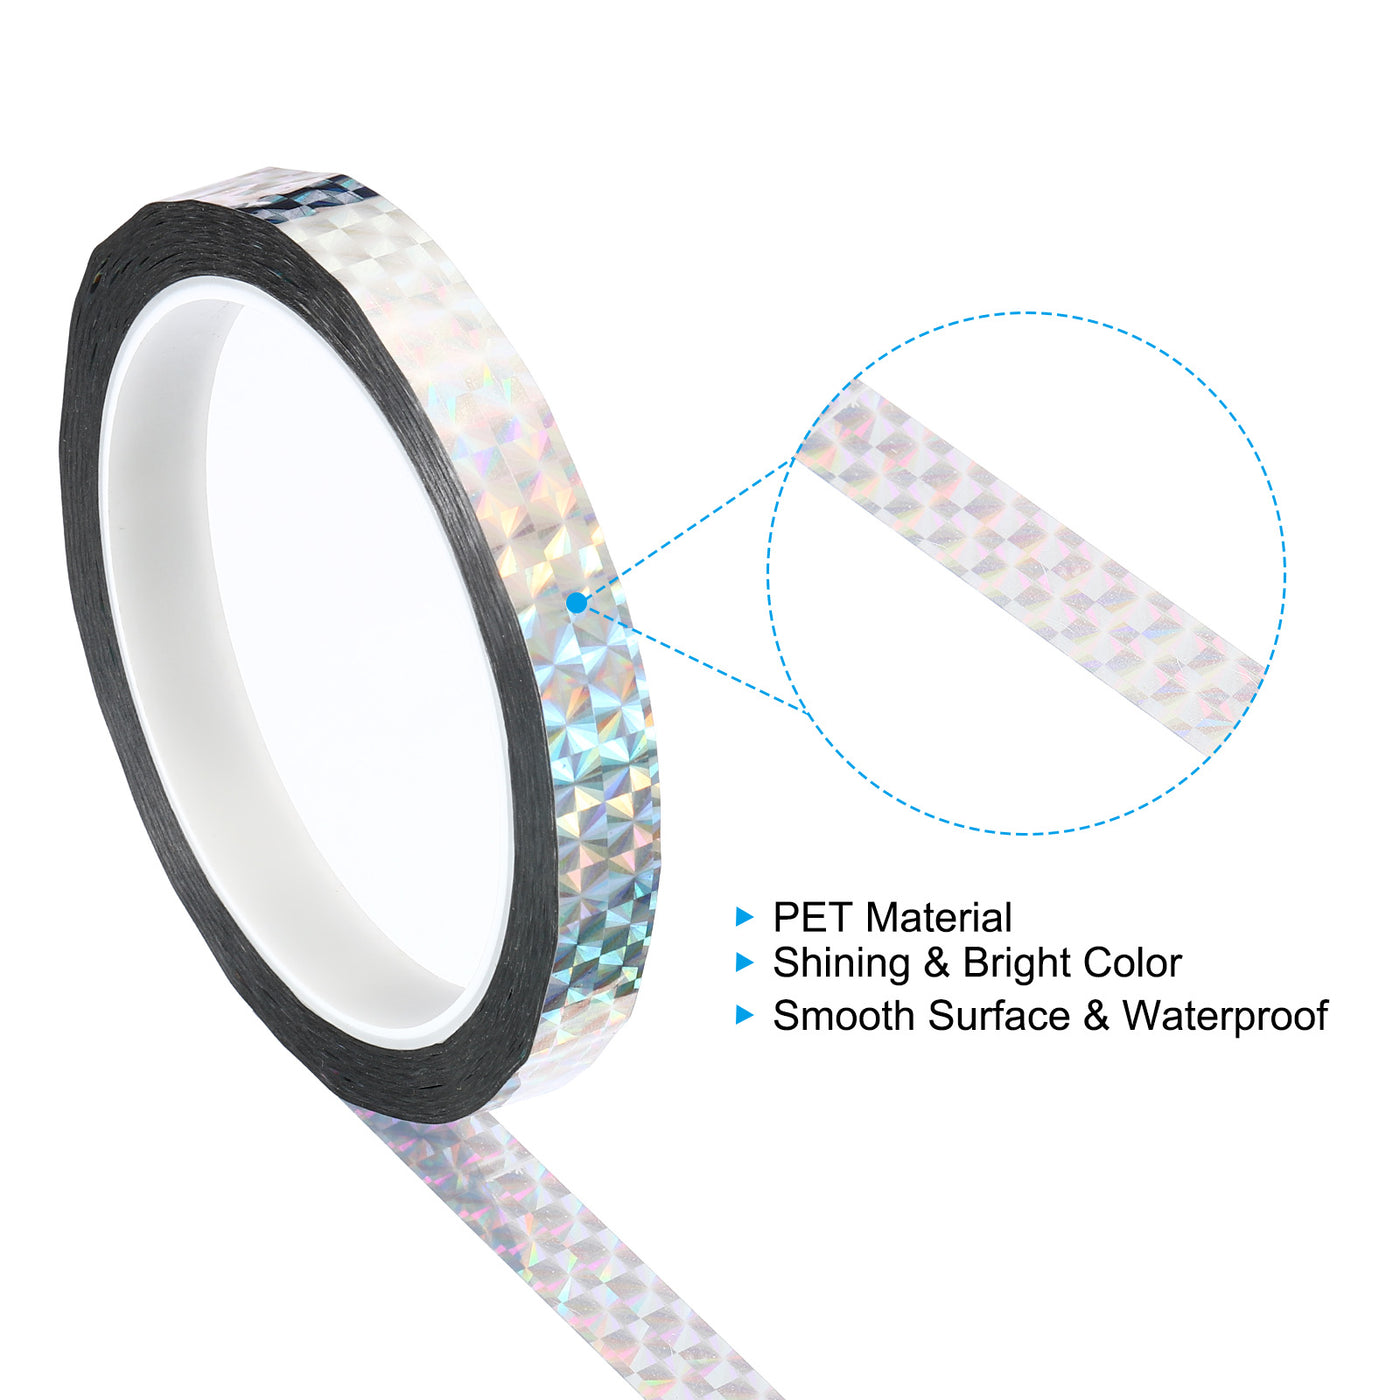 Harfington Prism Tape 12mm x 50m, 2 Pack Holographic Reflective Self Adhesive for DIY Art Craft Wrapping Decoration, Silver